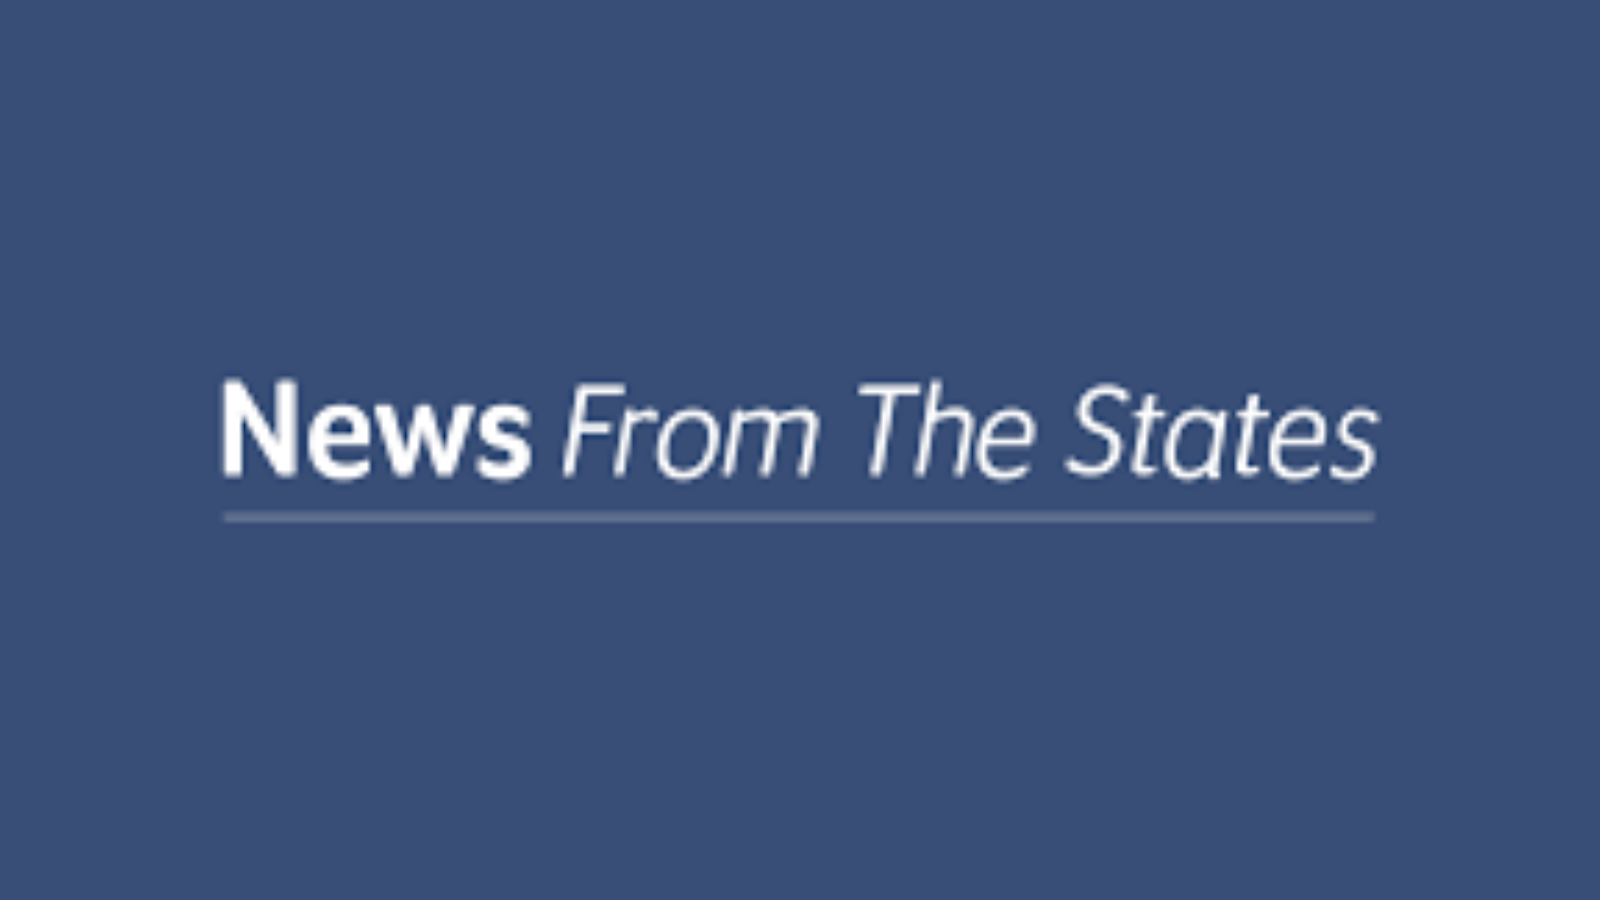 News from the states logo